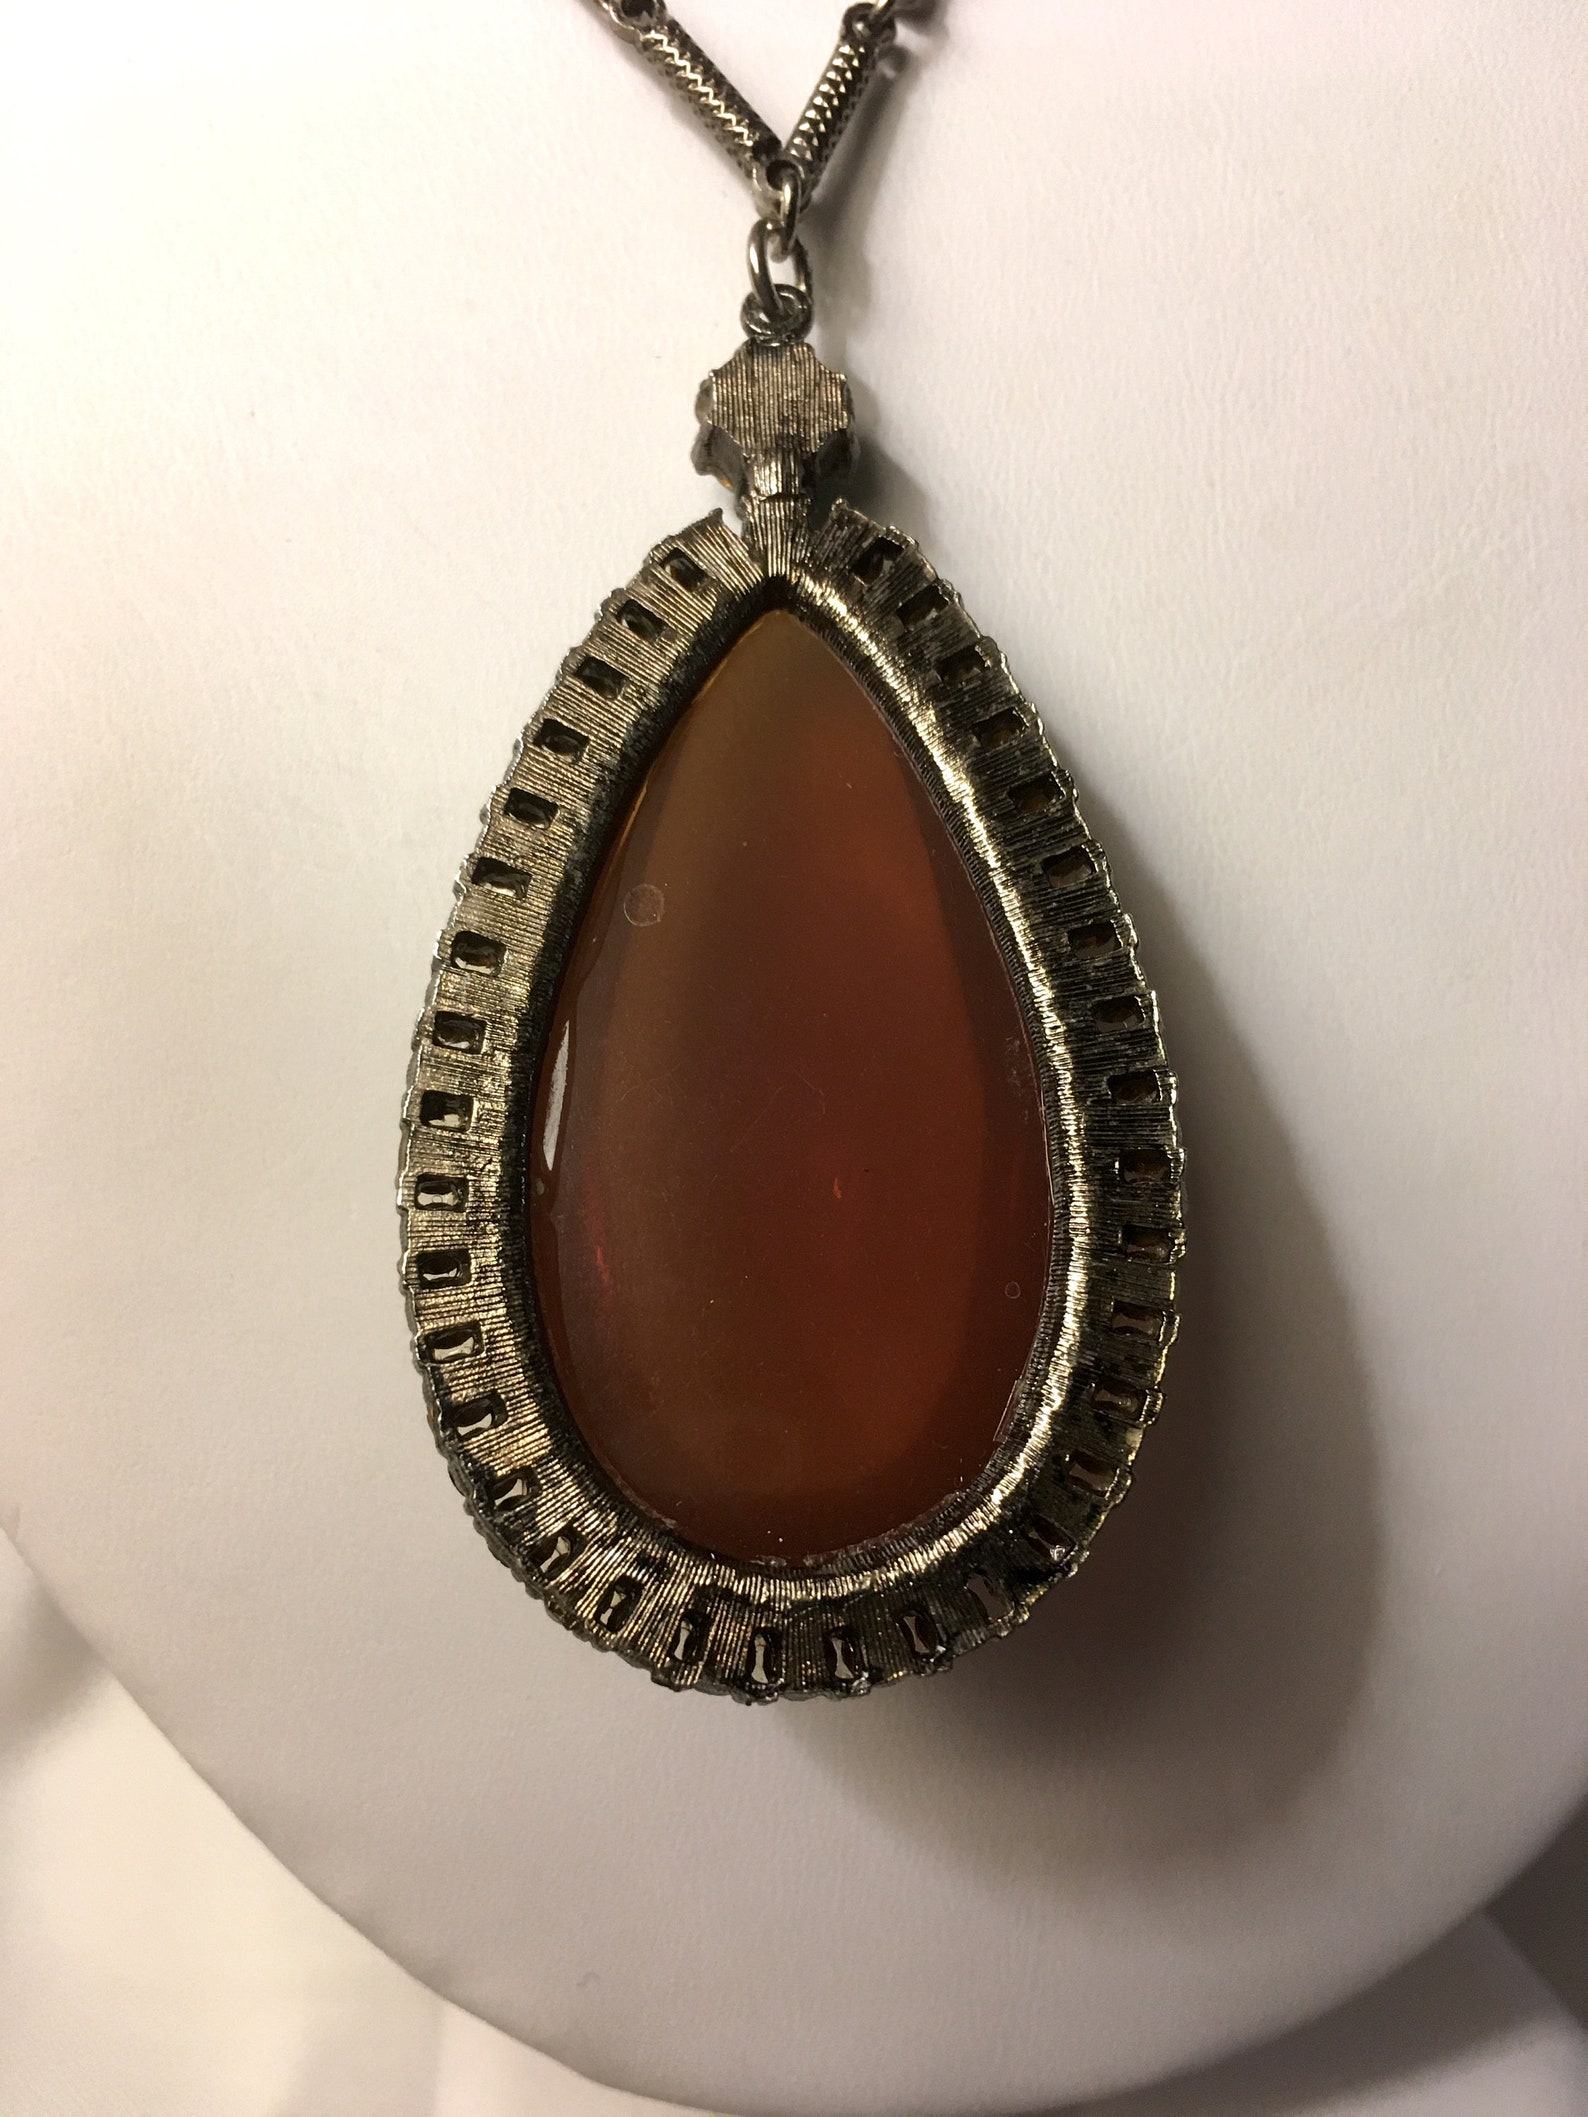 Vintage Glass Amber-colored Pendant with Silver-toned Chain | Etsy